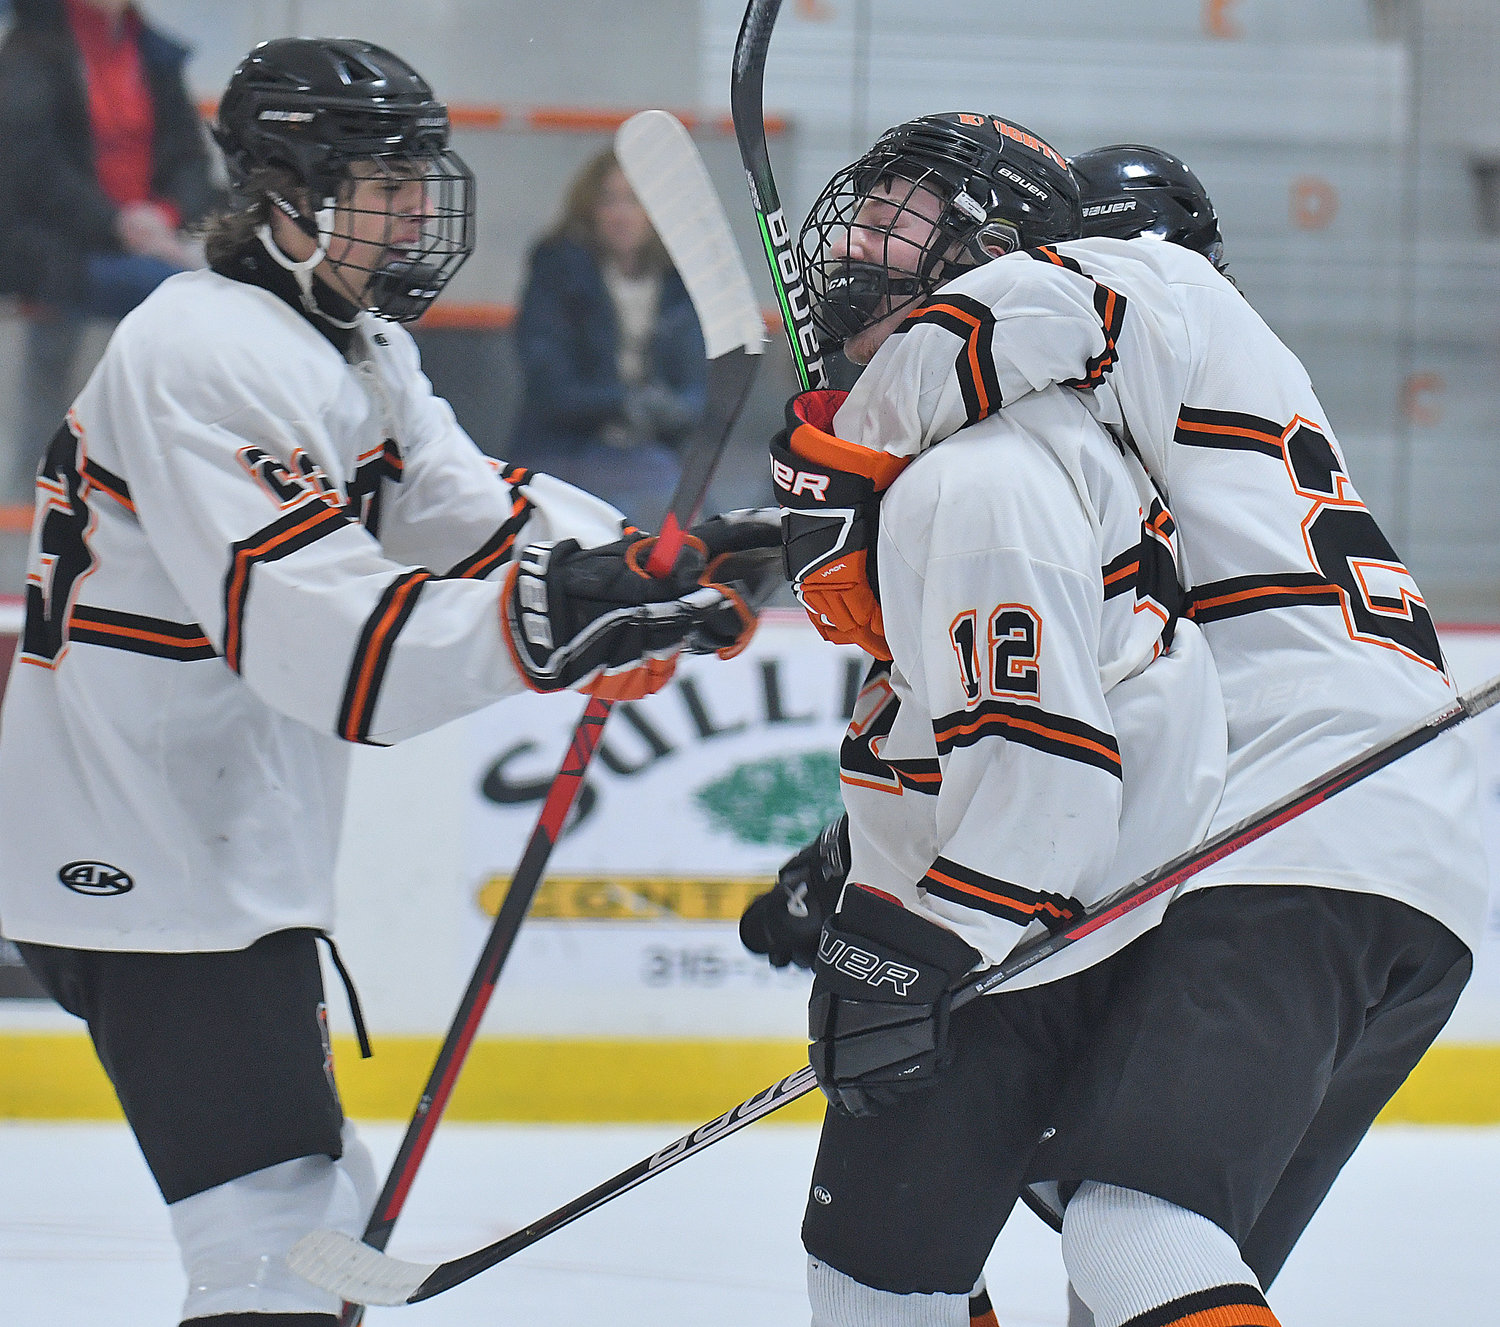 RFA celebrates a first period goal with Jake Premo mobbed by Jacob Swavely, right, and Carmen Orton (left) on Friday at Kennedy Arena.